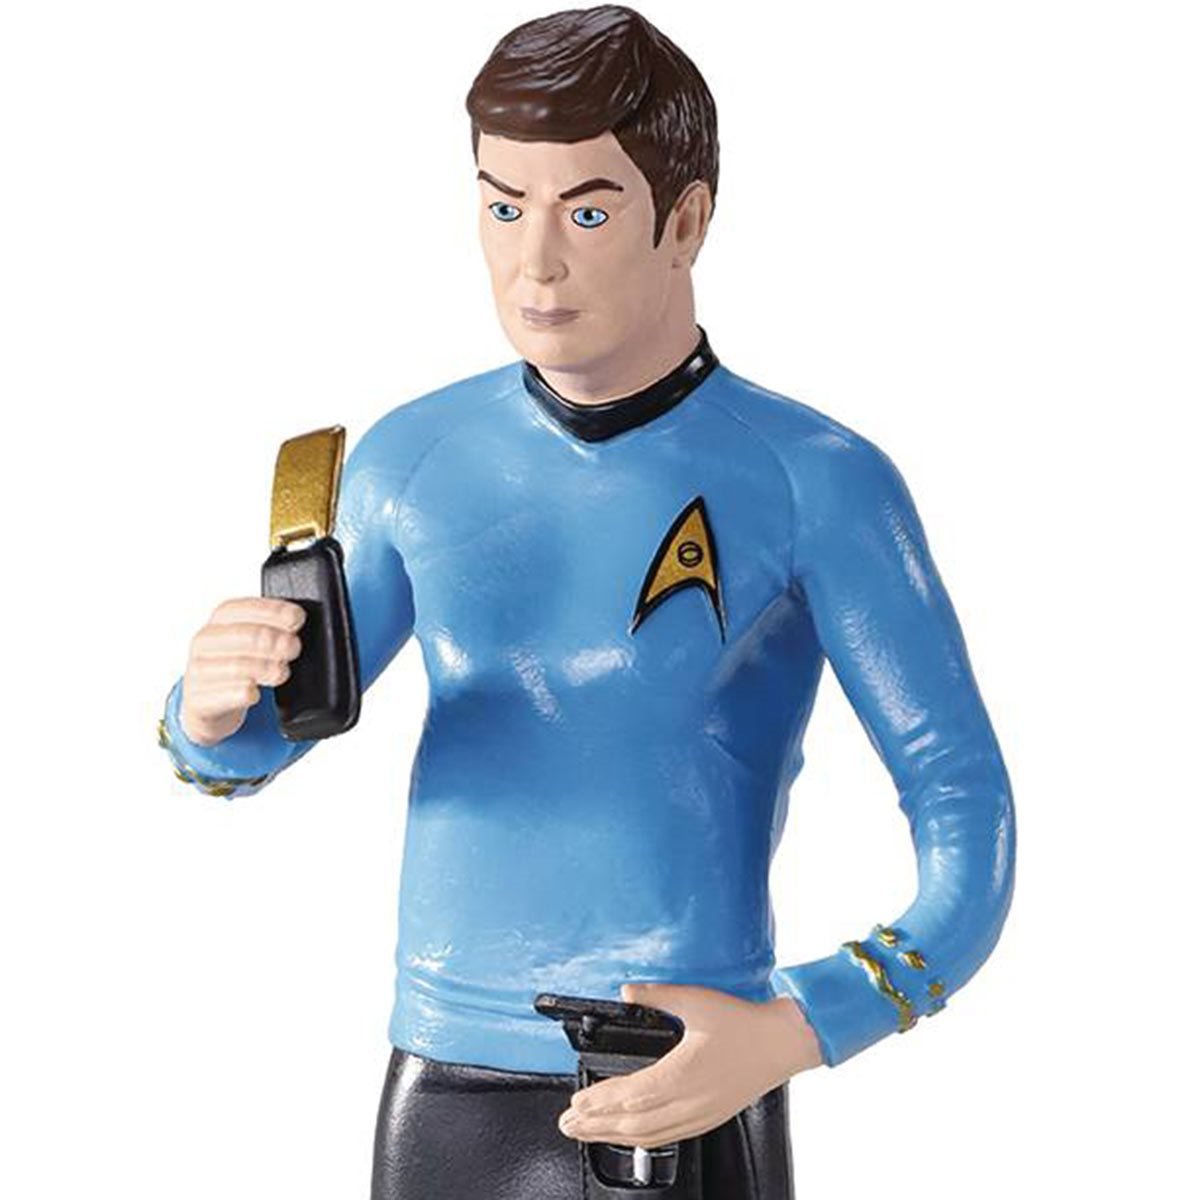 STAR TREK TROI POSABLE BENDABLE BENDYFIG FIGURE FIGURINE WITH STAND 